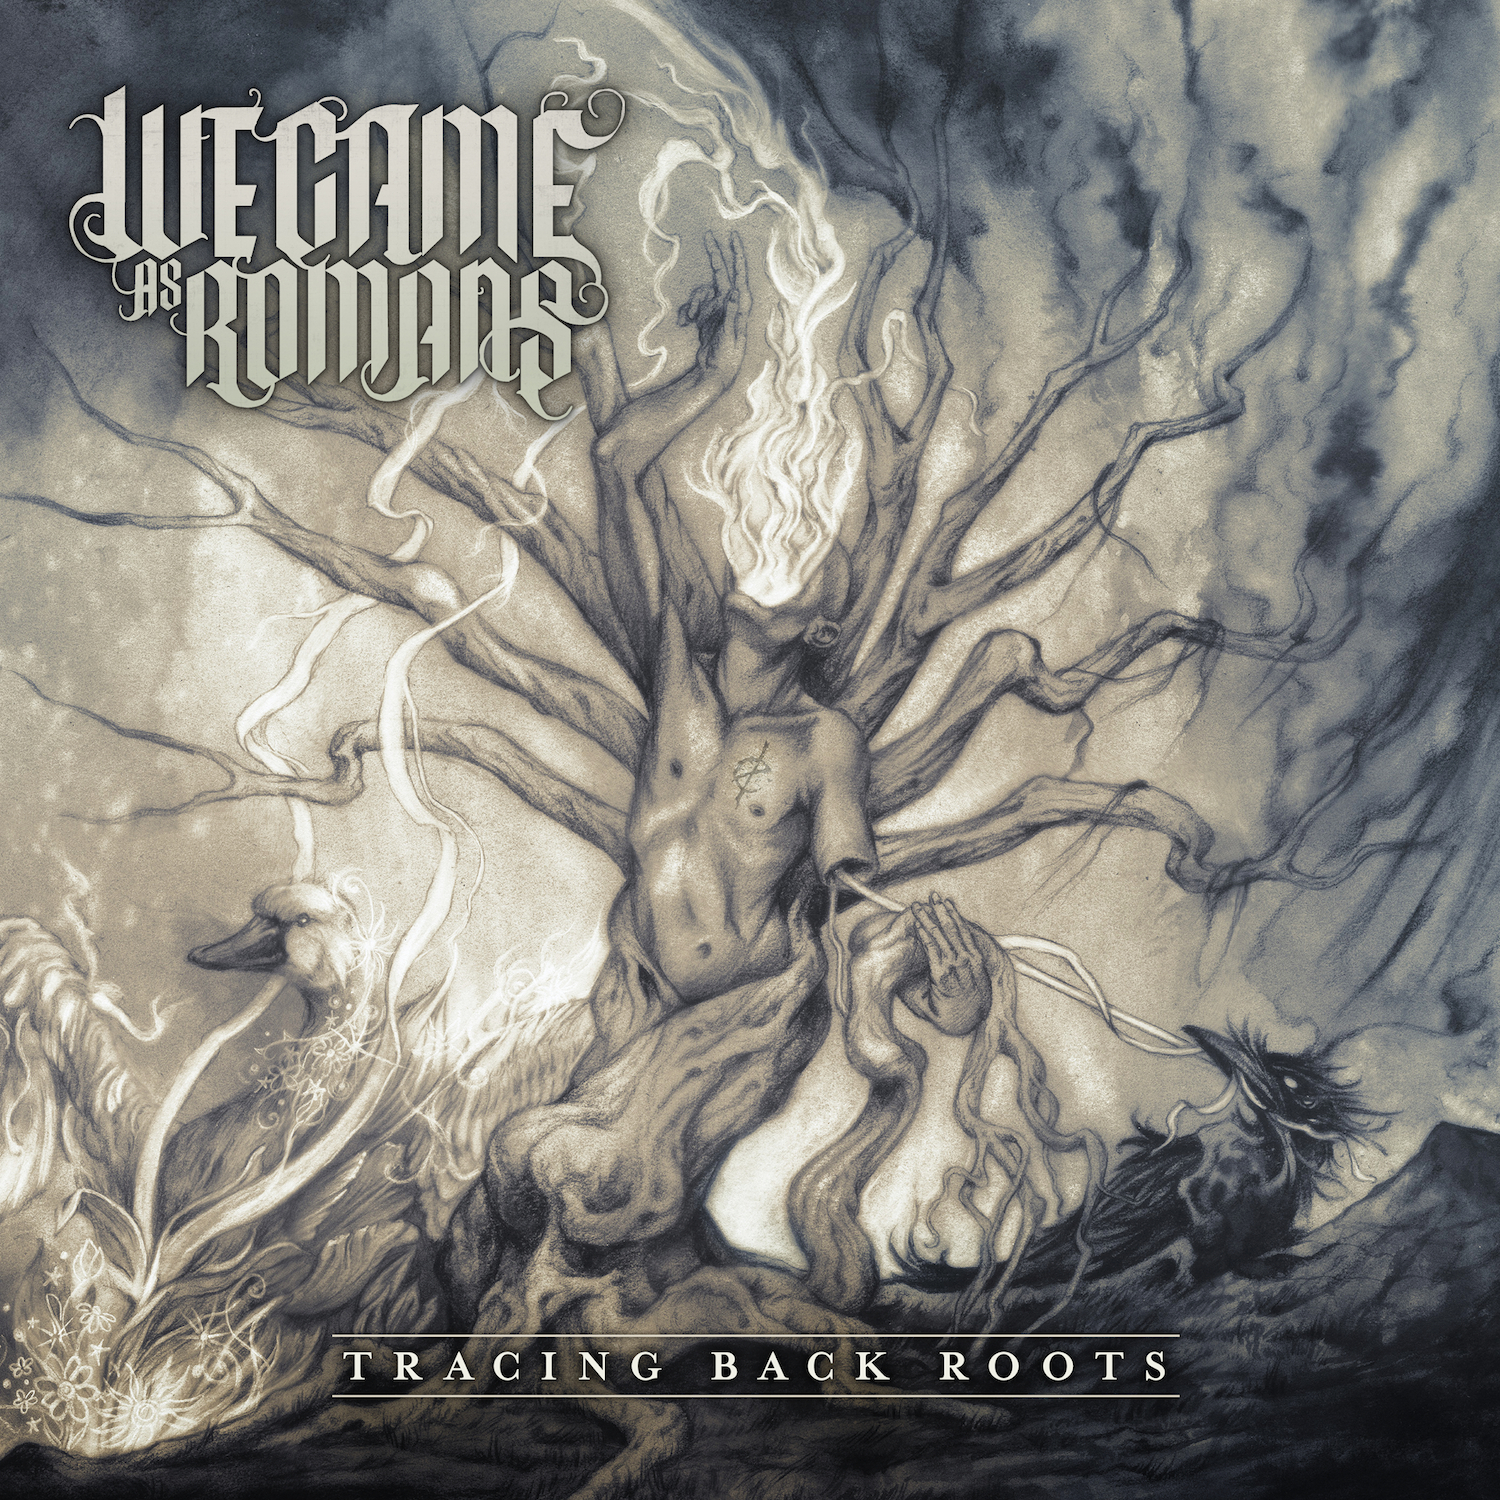 News Added May 21, 2013 We Came As Romans have announced that they will release a new full-length album titled Tracing Back Roots on July 23 via Equal Vision Records. The album, which was produced by John Feldmann comprises the 11 tracks listed below with artwork and clean vocals from singer Dave Stephens for the […]